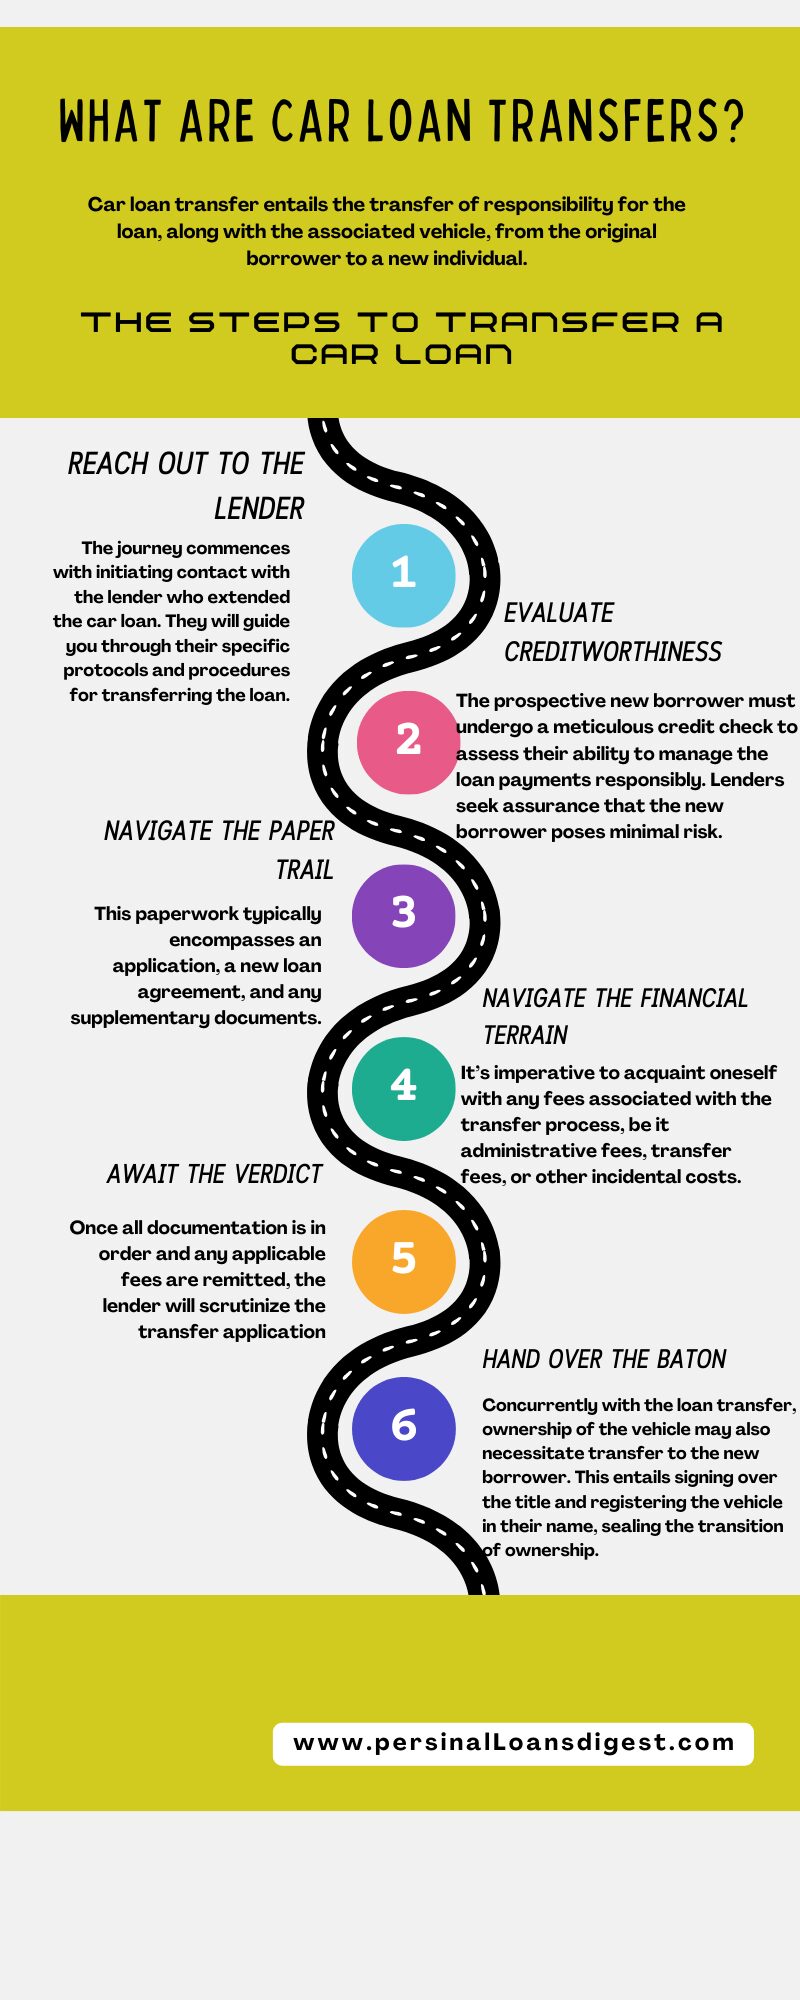 An infographic illustrating The Steps to Transfer a Car Loan